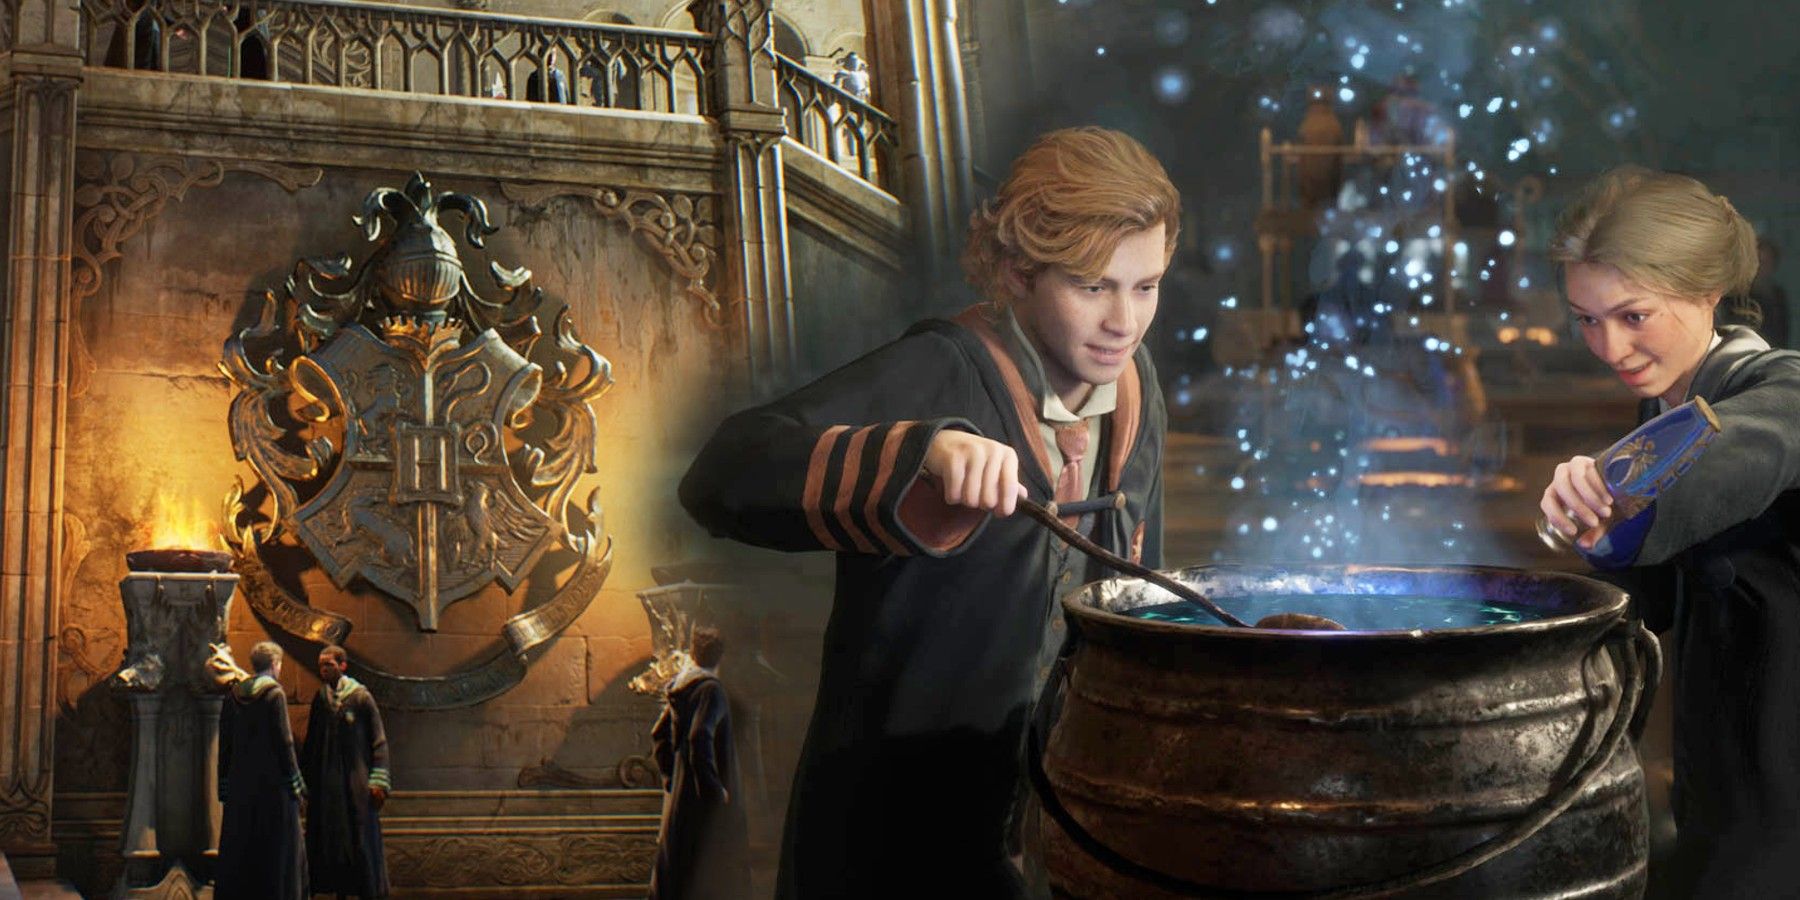 Incredible Hogwarts Legacy Gameplay Shows A Huge World Of Wizardry